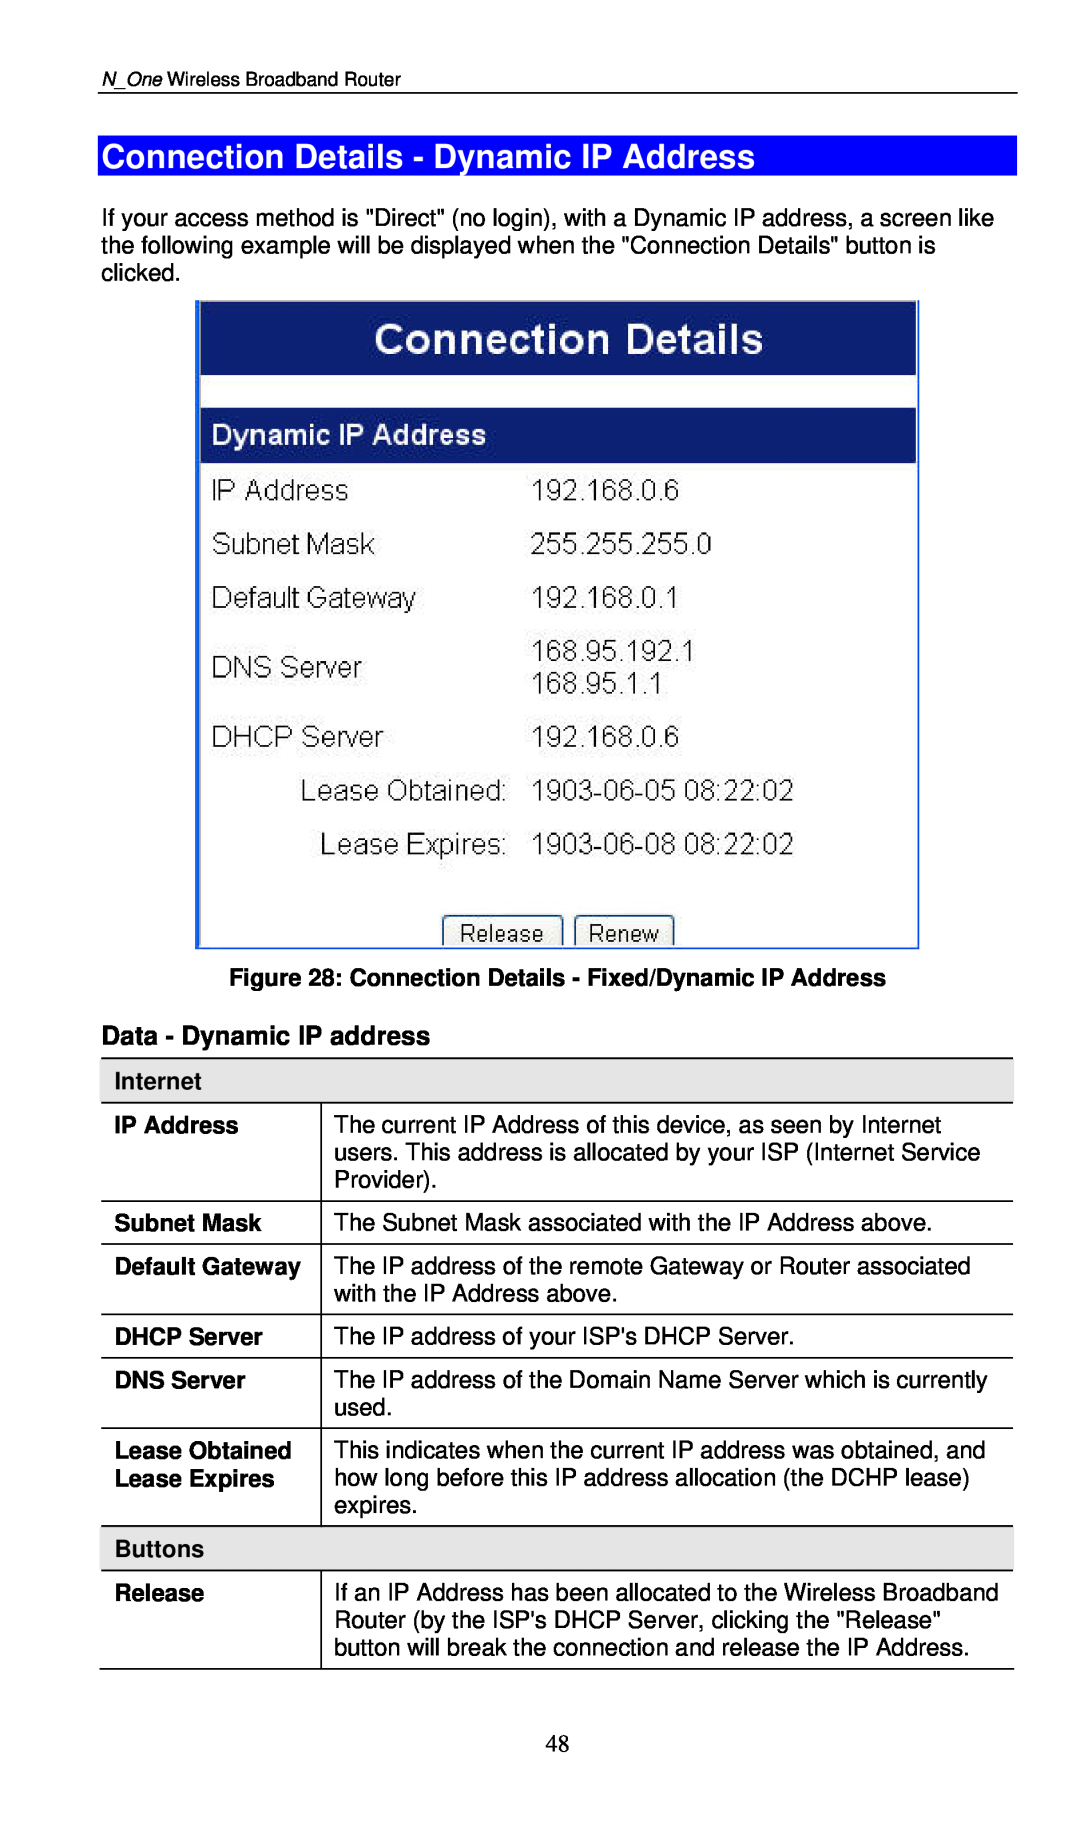 LevelOne WBR-6000 Connection Details - Dynamic IP Address, Connection Details - Fixed/Dynamic IP Address, Internet 